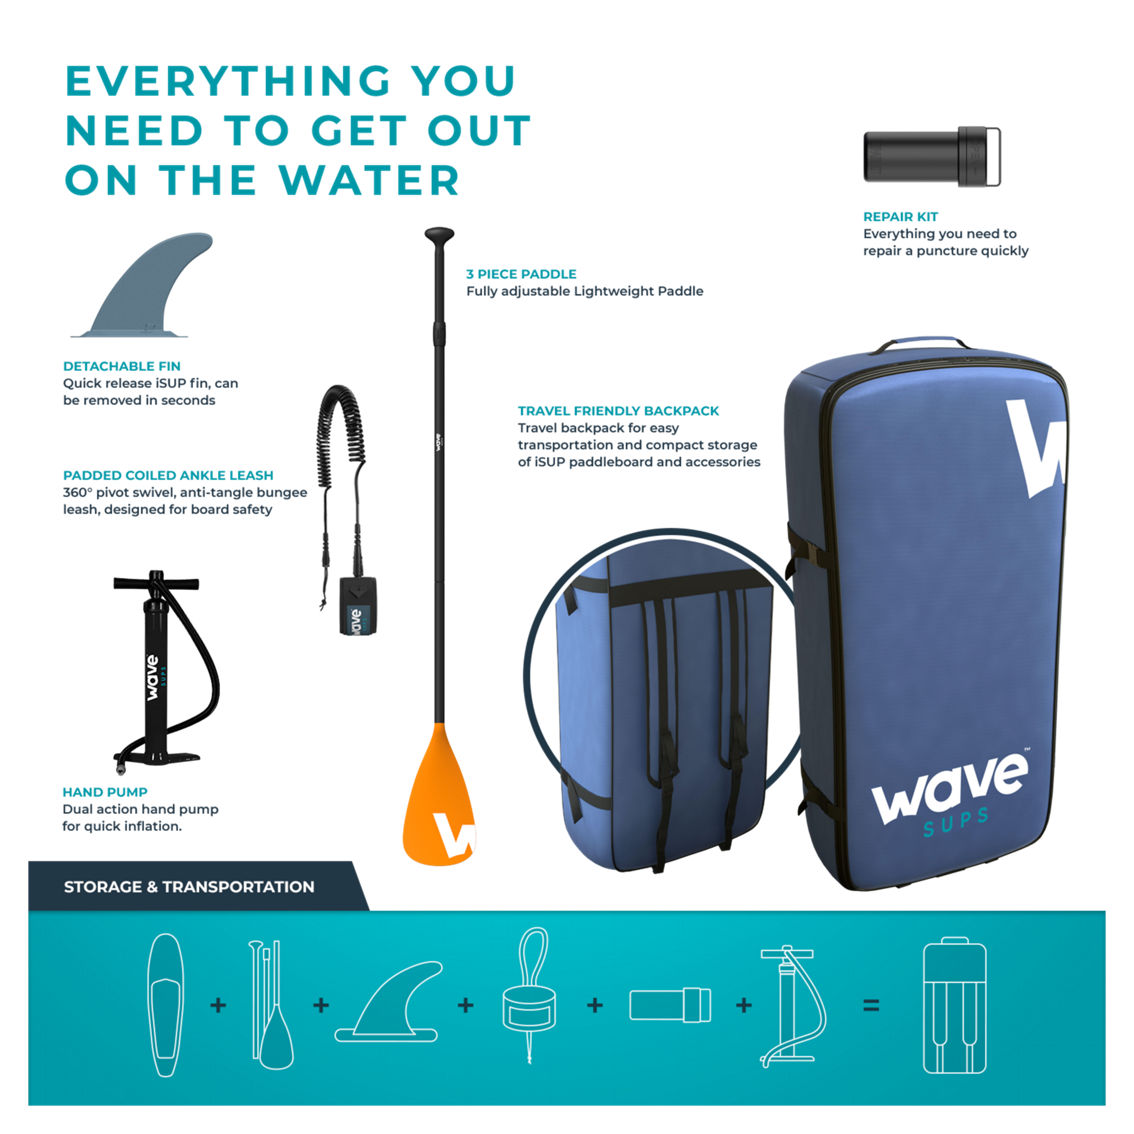 WAVE Direct 11 ft. Wave Cruiser Sup Package - Image 4 of 4